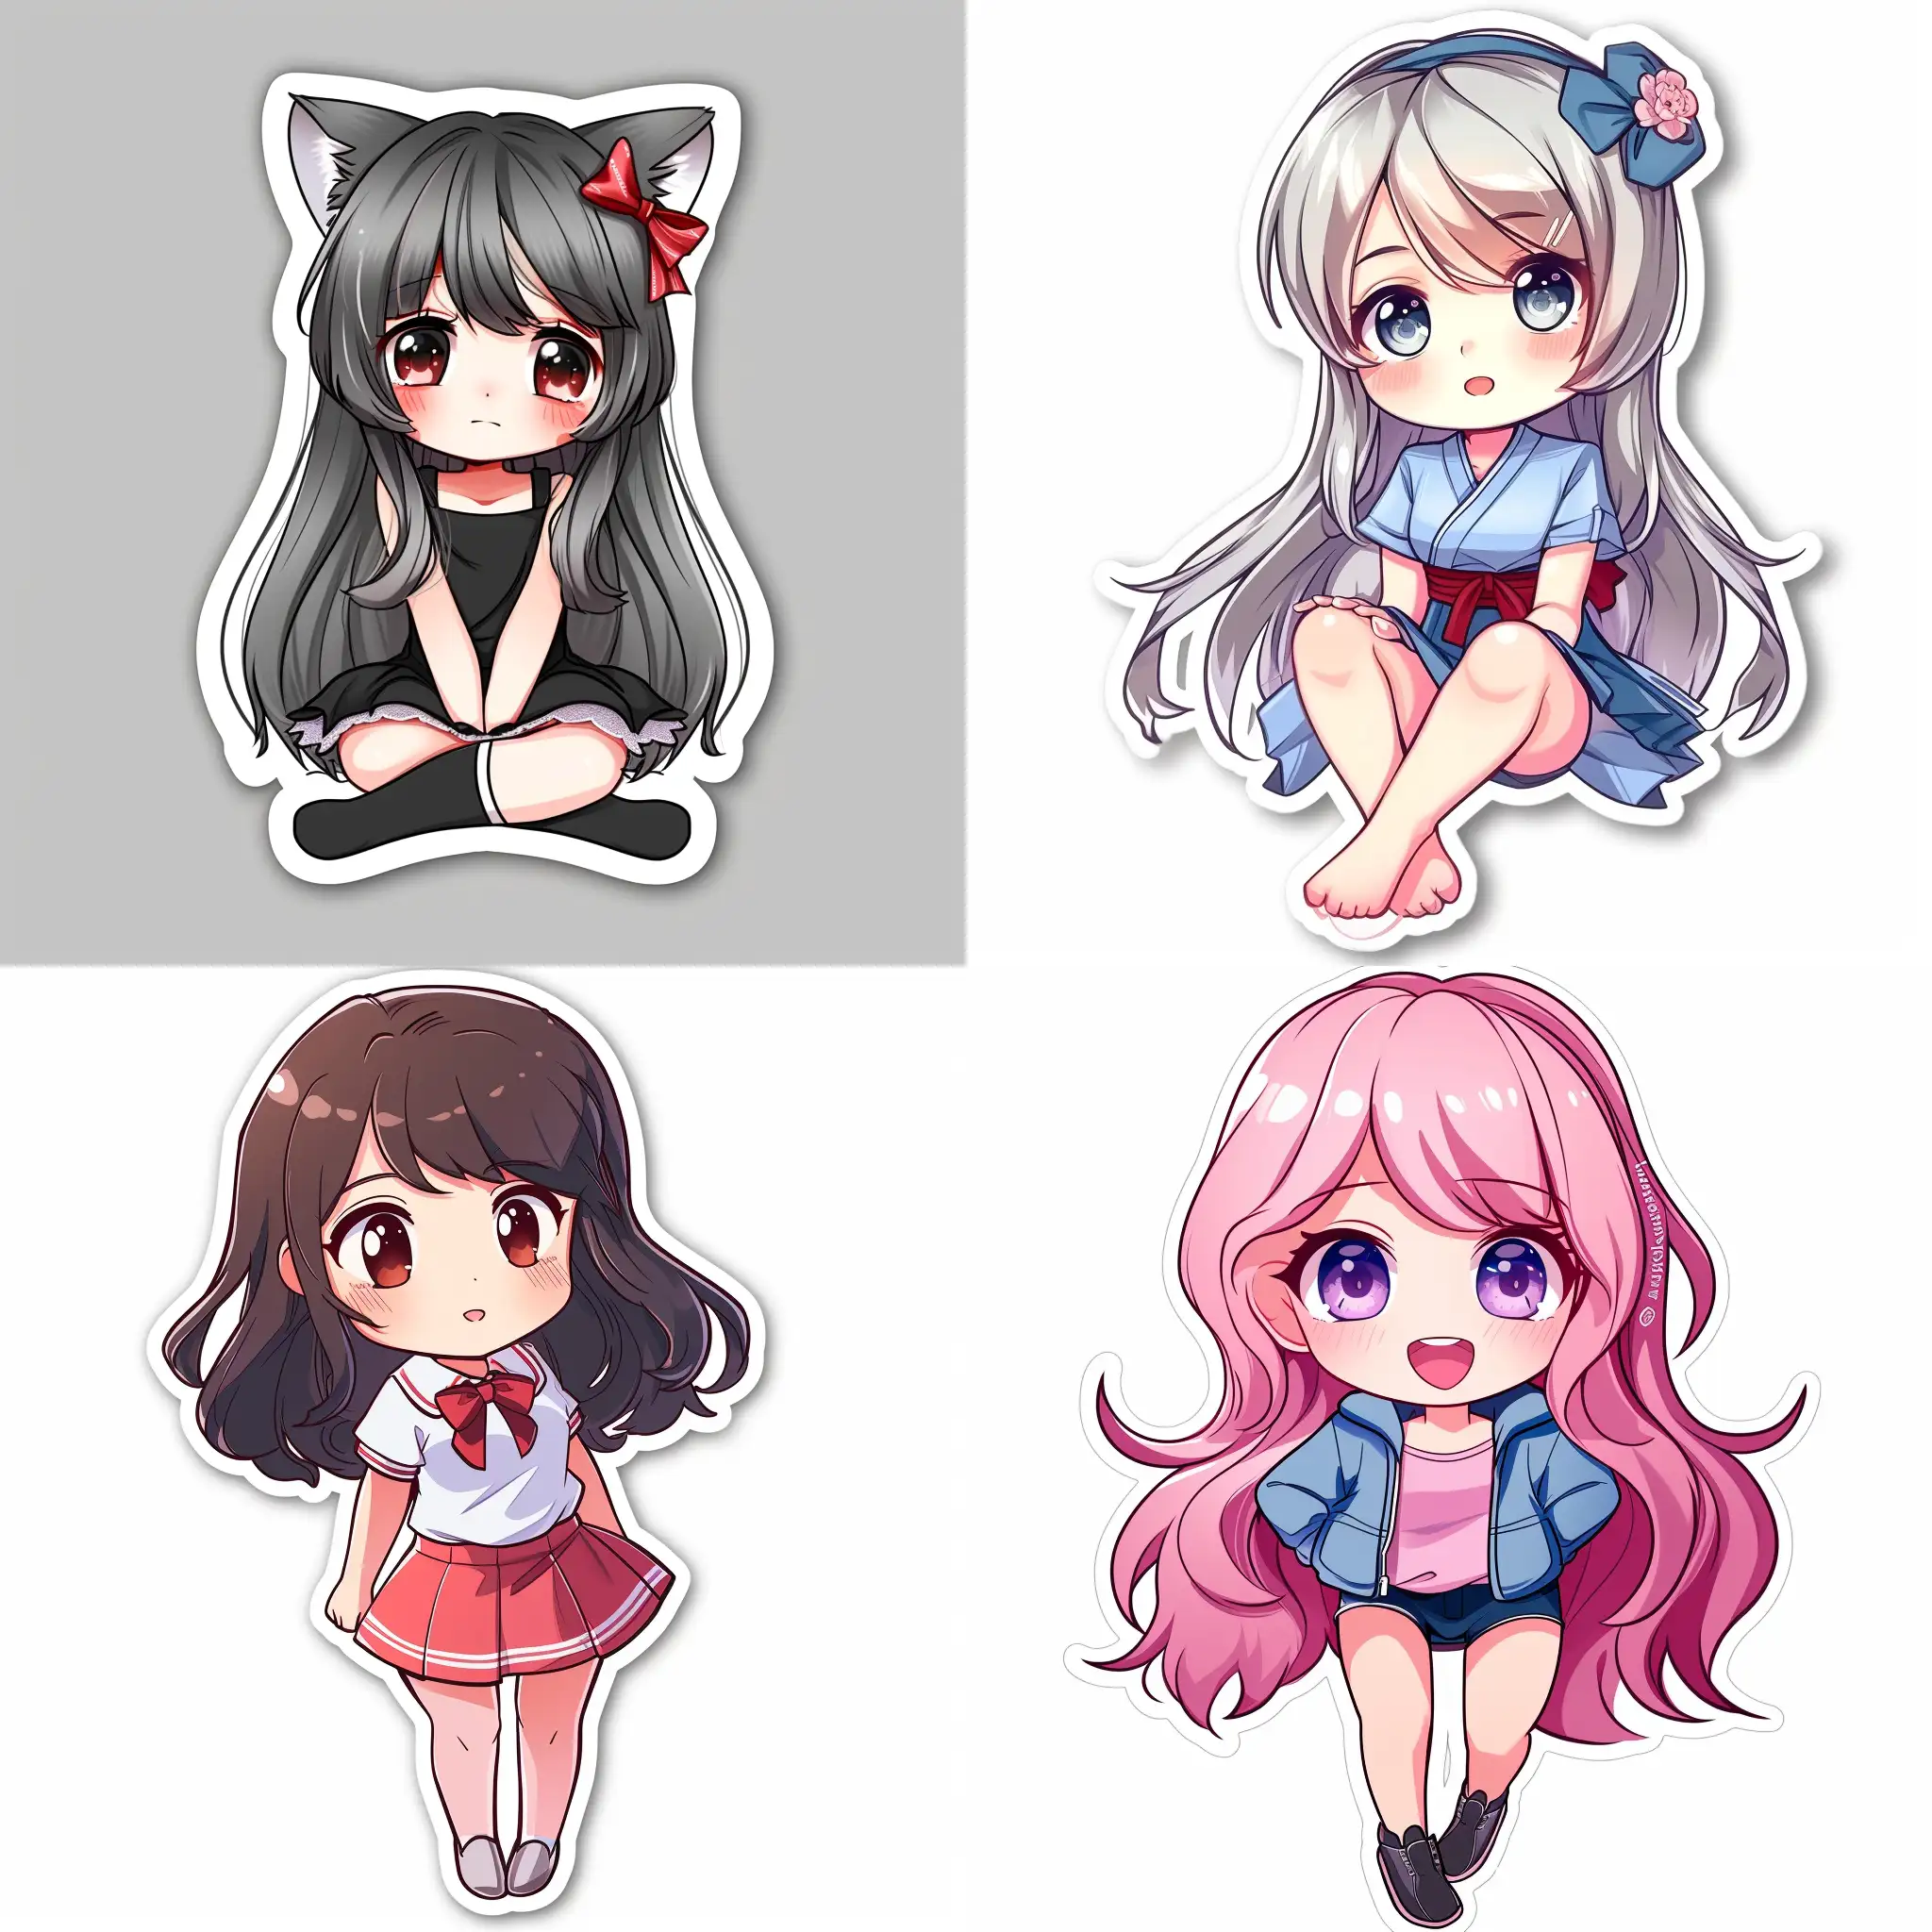 Adorable-Chibi-Sticker-Collection-with-Vibrant-Colors-and-Expressive-Poses